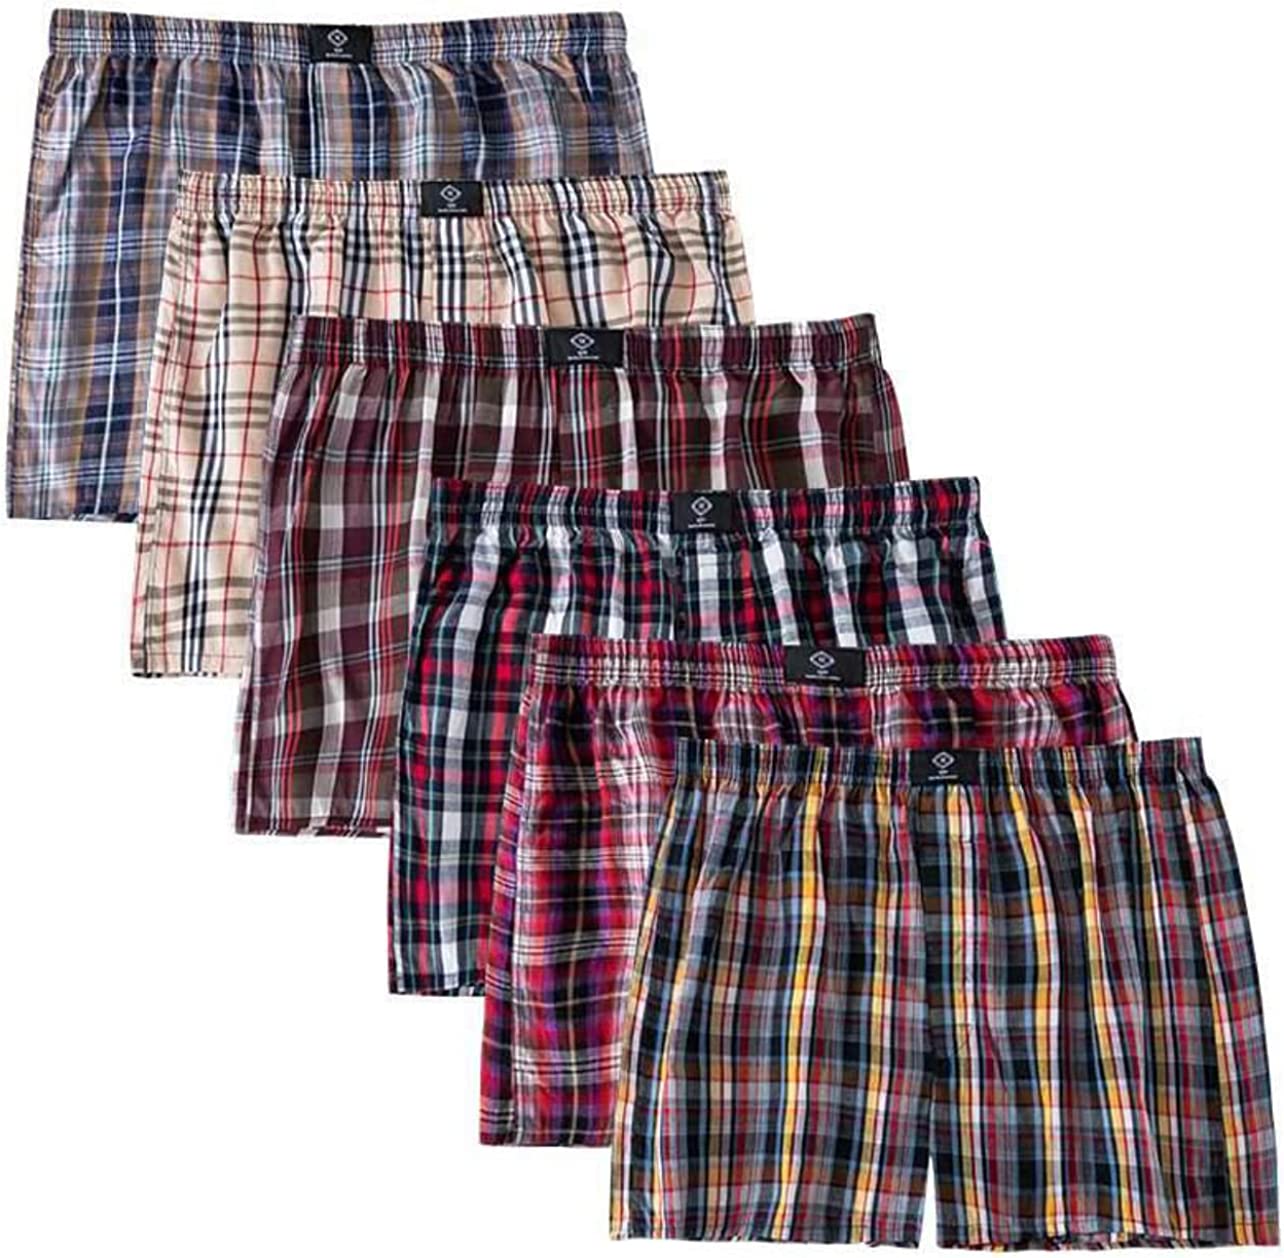 Quality Detail 6 pack of European XL / US Medium Classic Woven Boxers